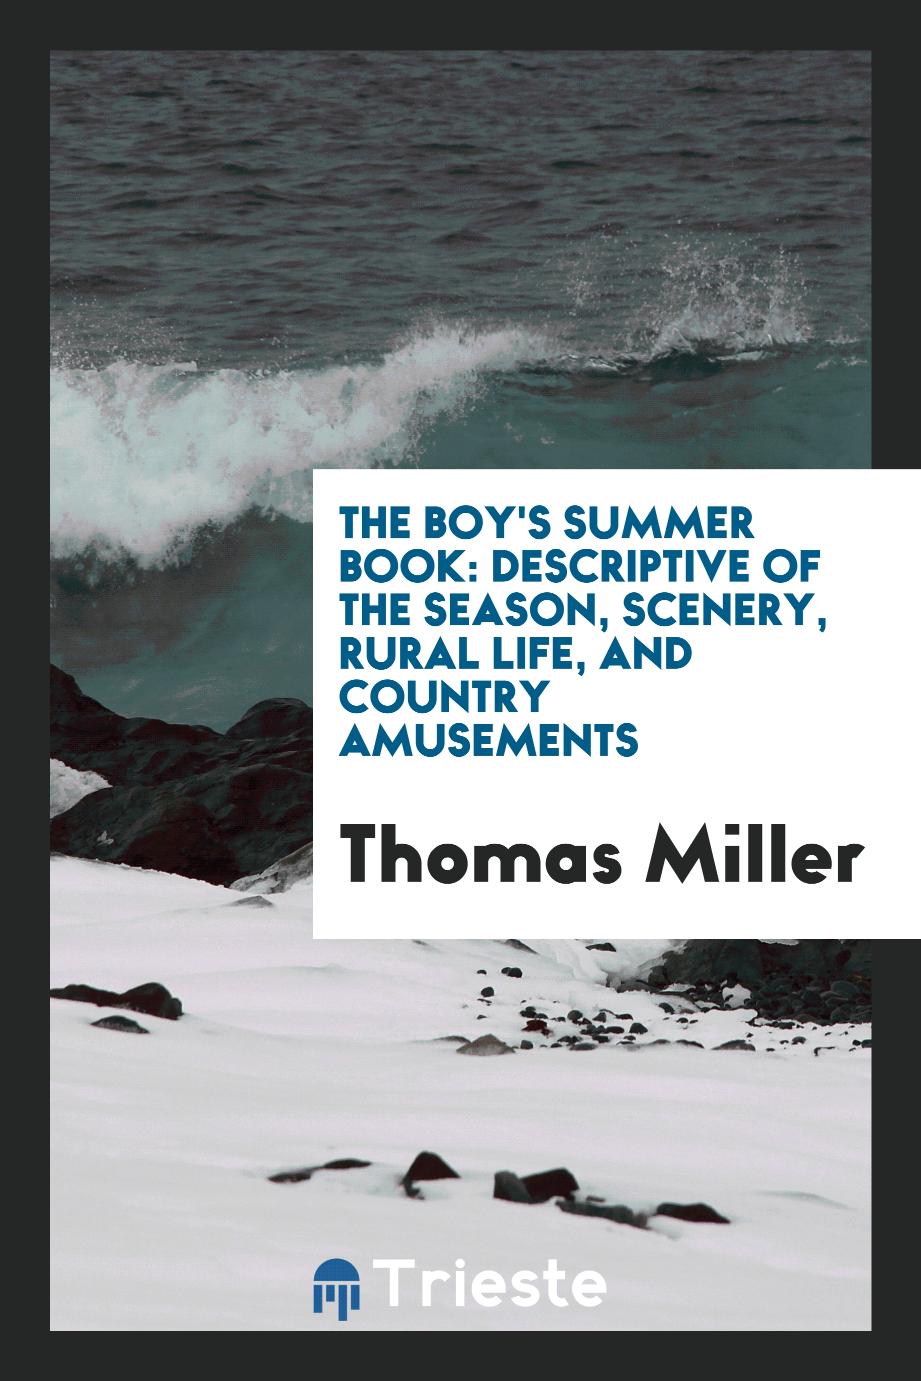 The Boy's Summer Book: Descriptive of the Season, Scenery, Rural Life, and Country Amusements